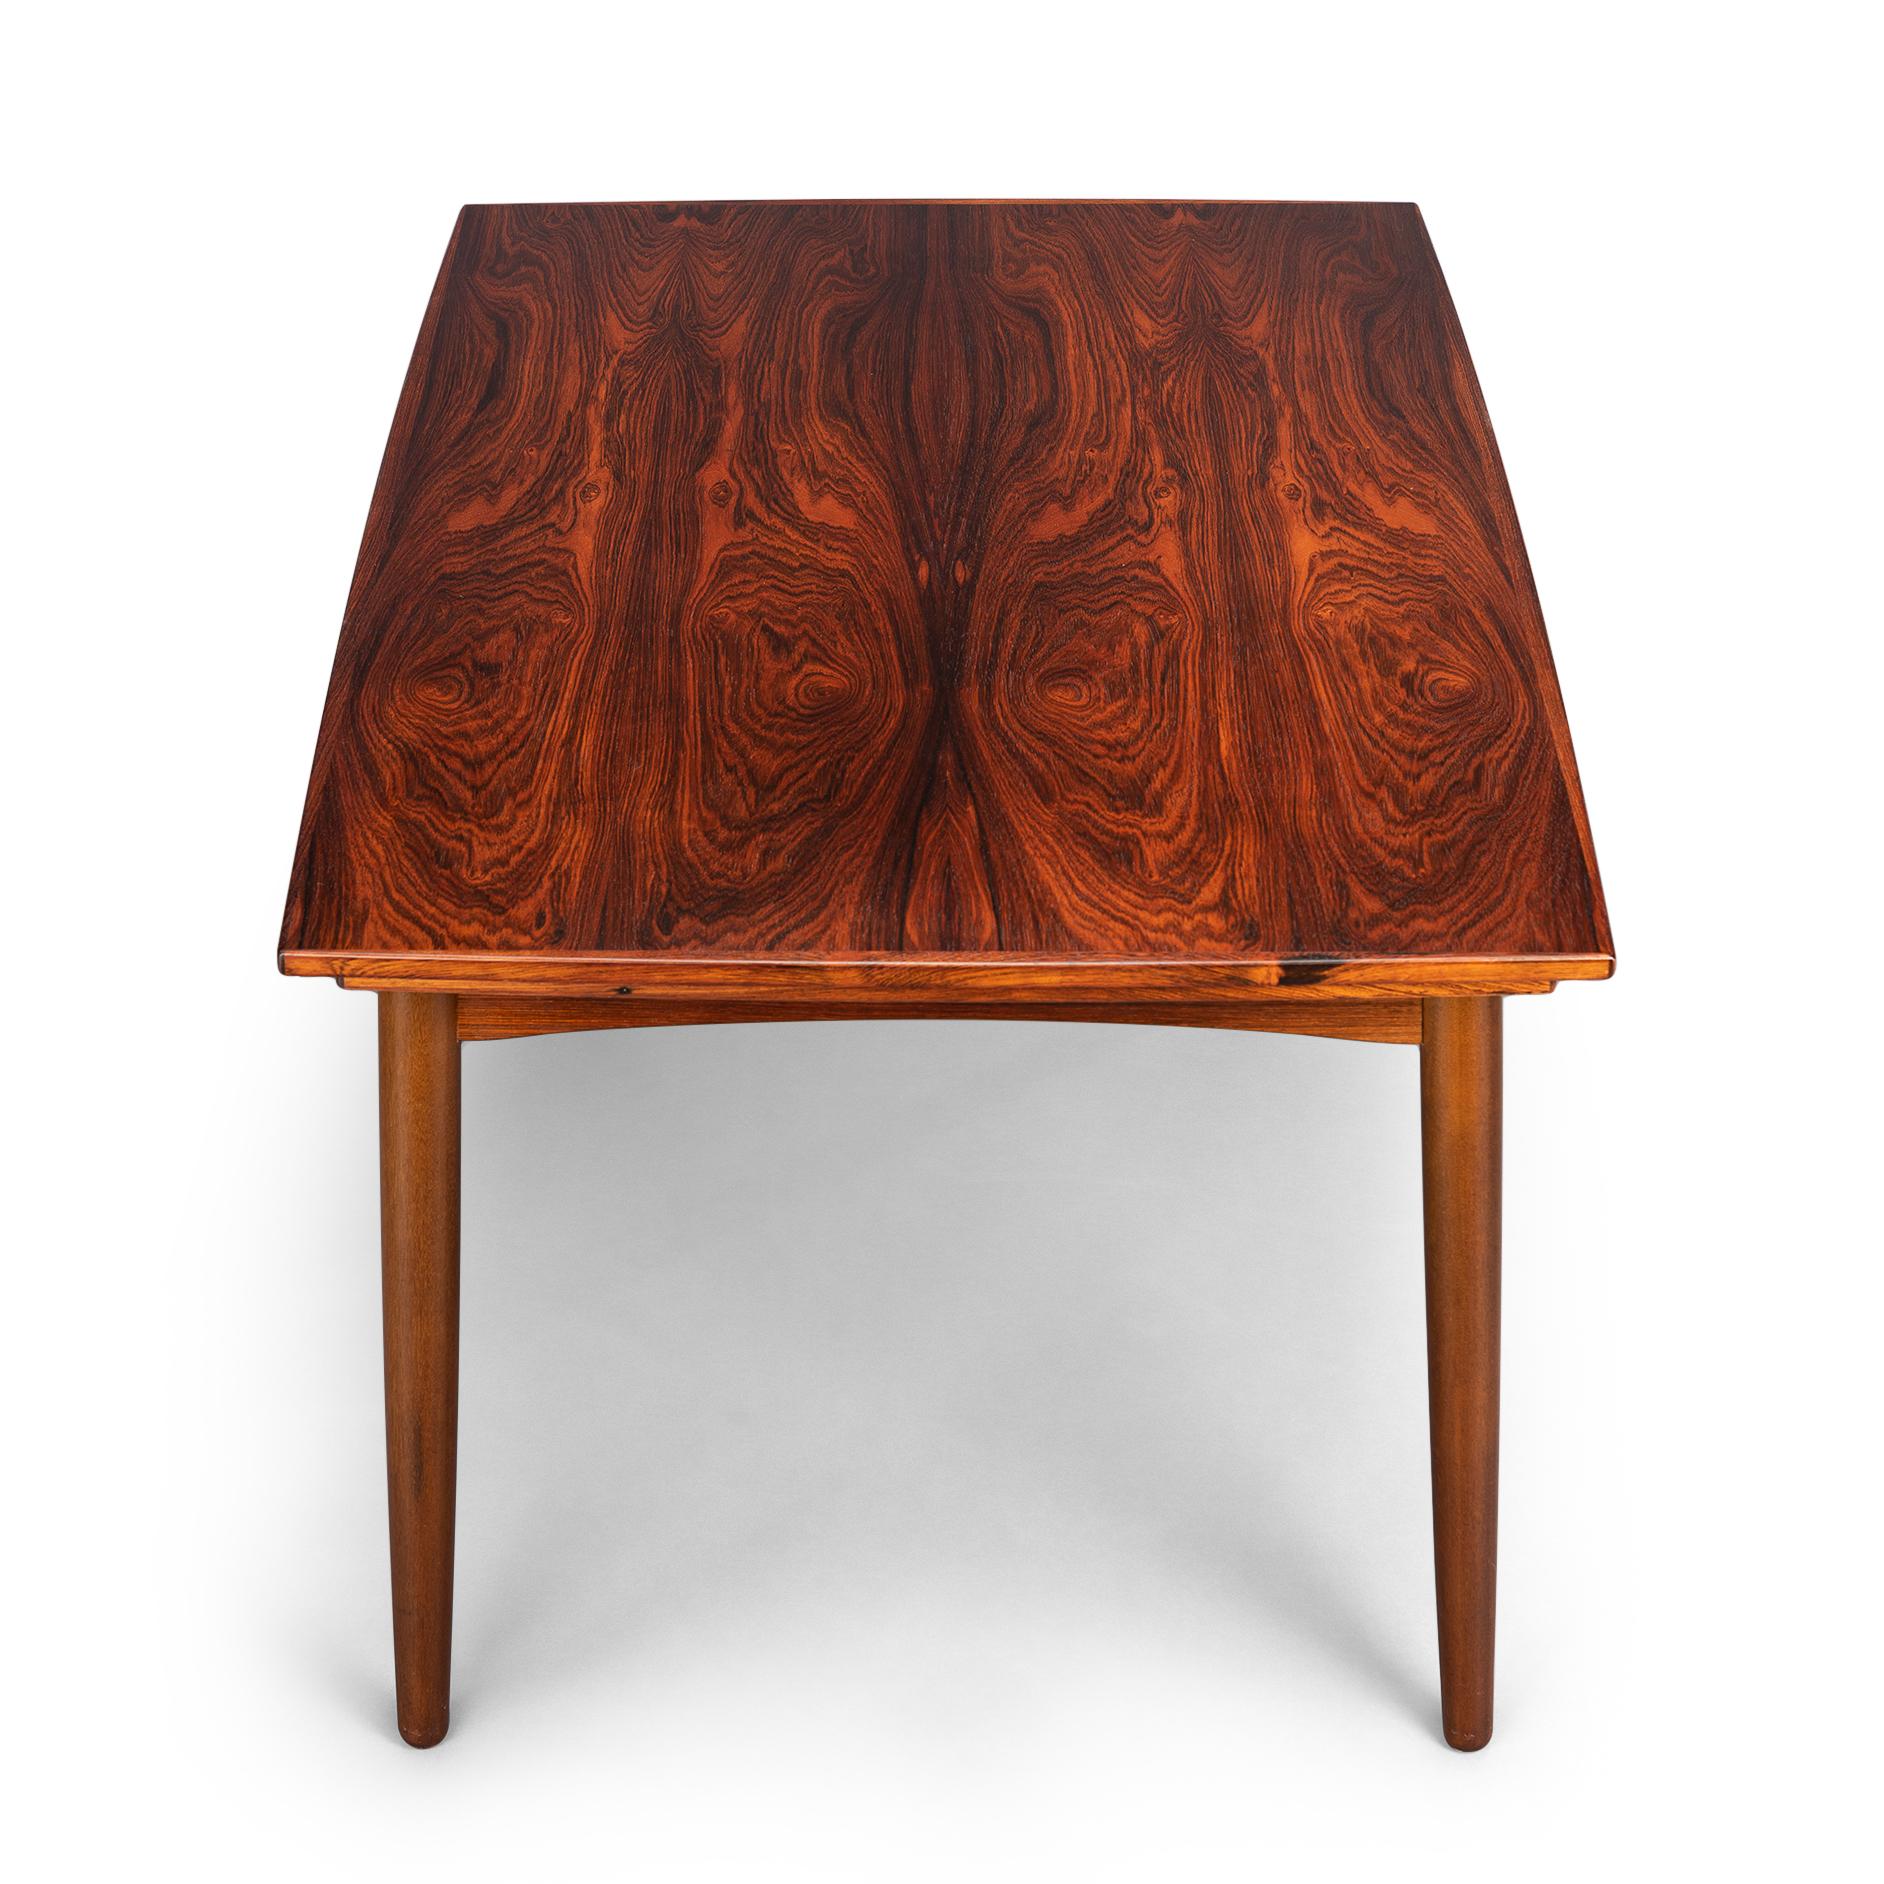 Marvelous dining table crafted in a stunning mahogany veneer and solid mahogany. Design by Kai Kristiansen for FM Møbler and produced in the early 1960s. Very high degree of quality brought into play with a slight oval shape that extends further